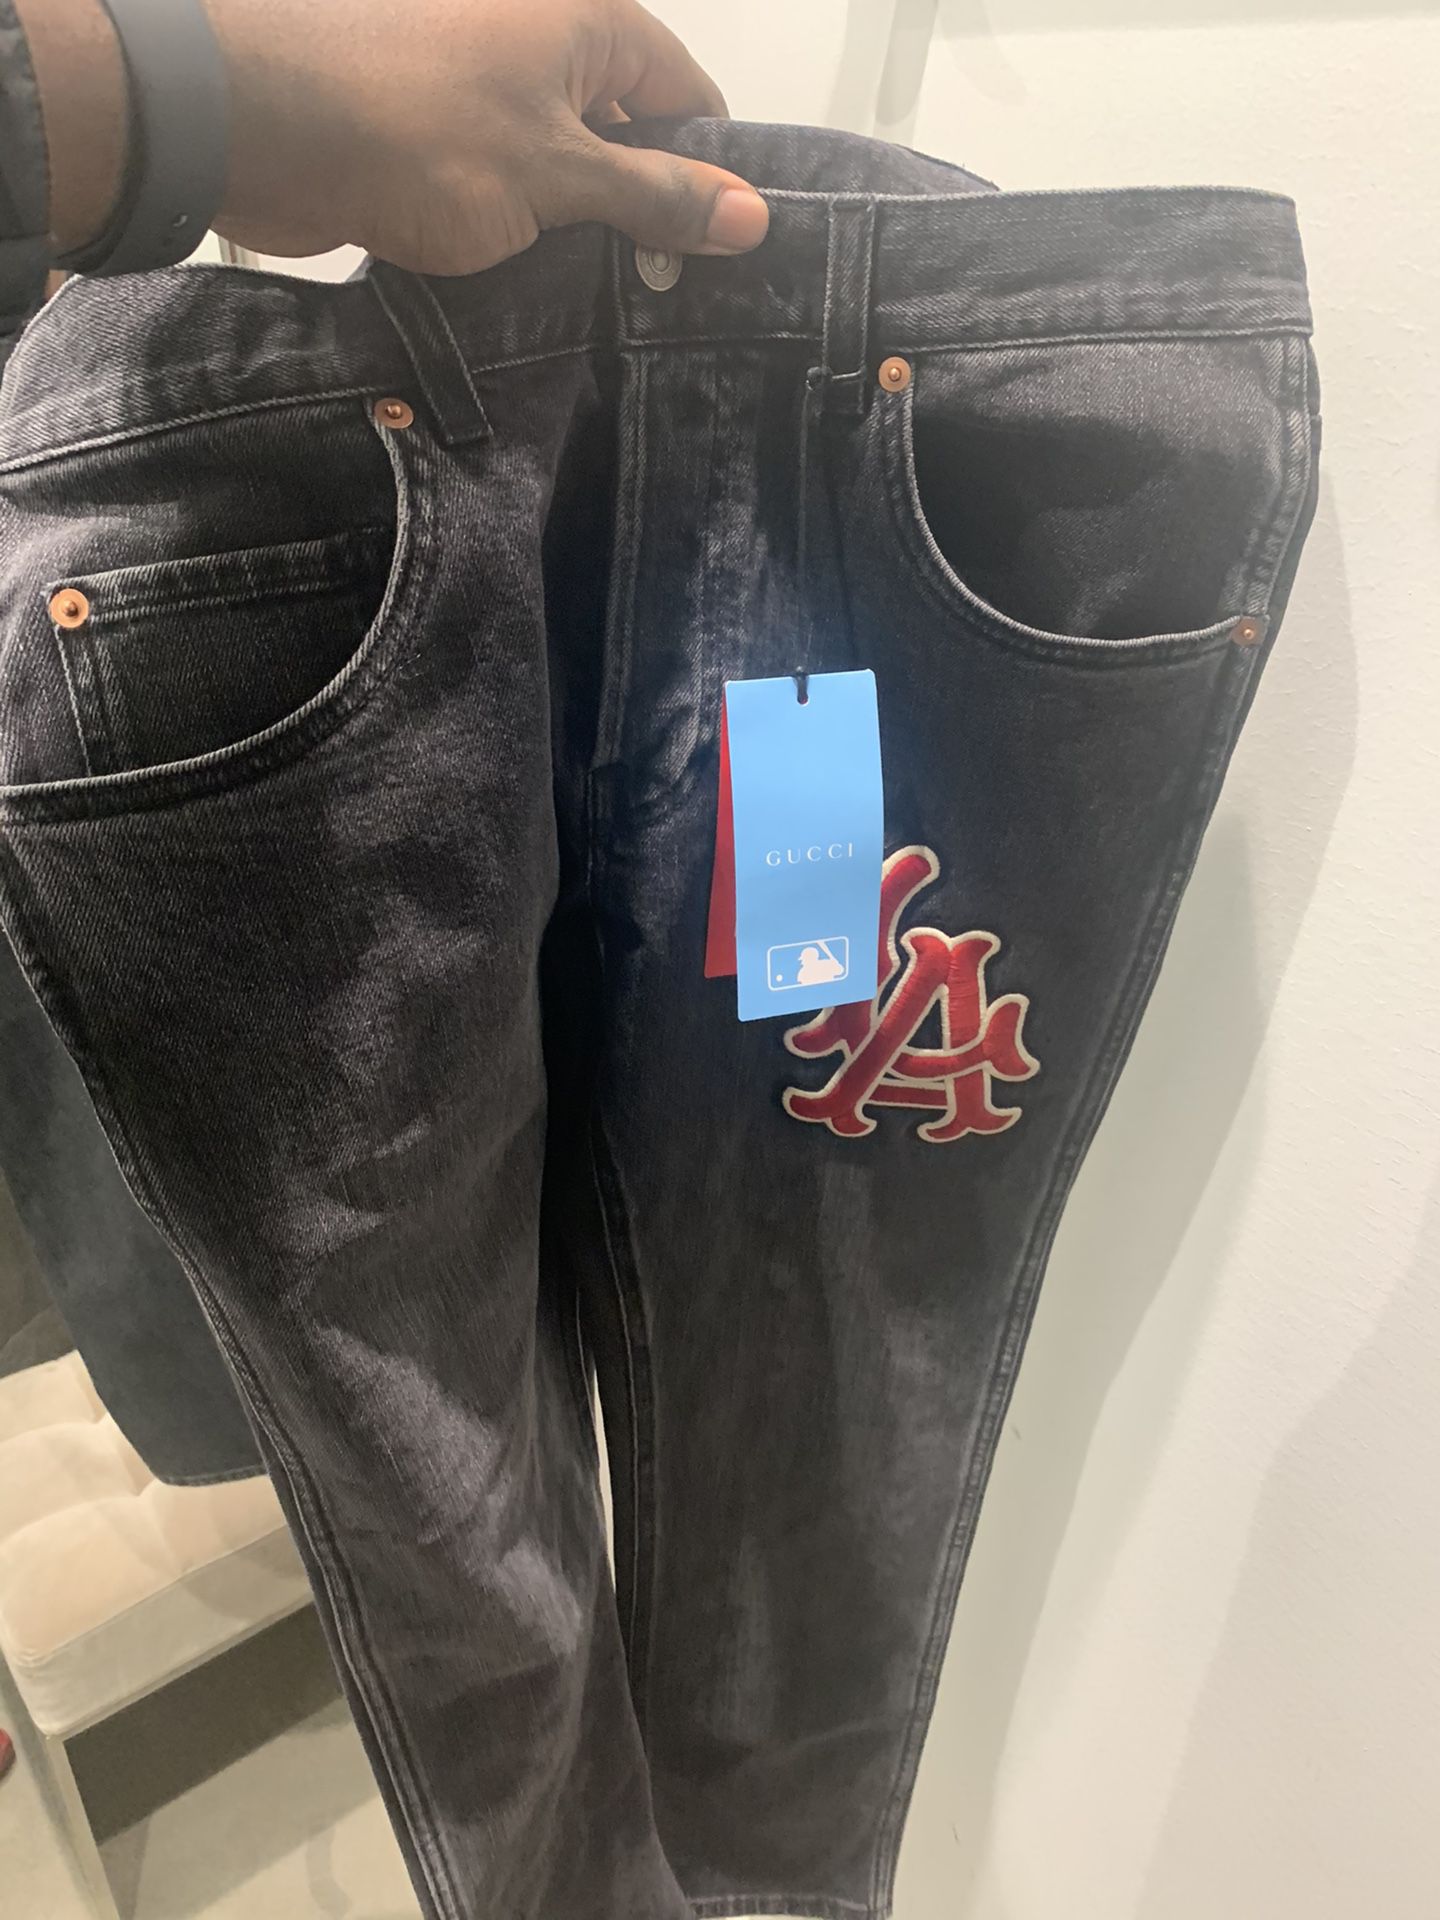 Gucci jeans Size 32 for Sale in New York, NY - OfferUp